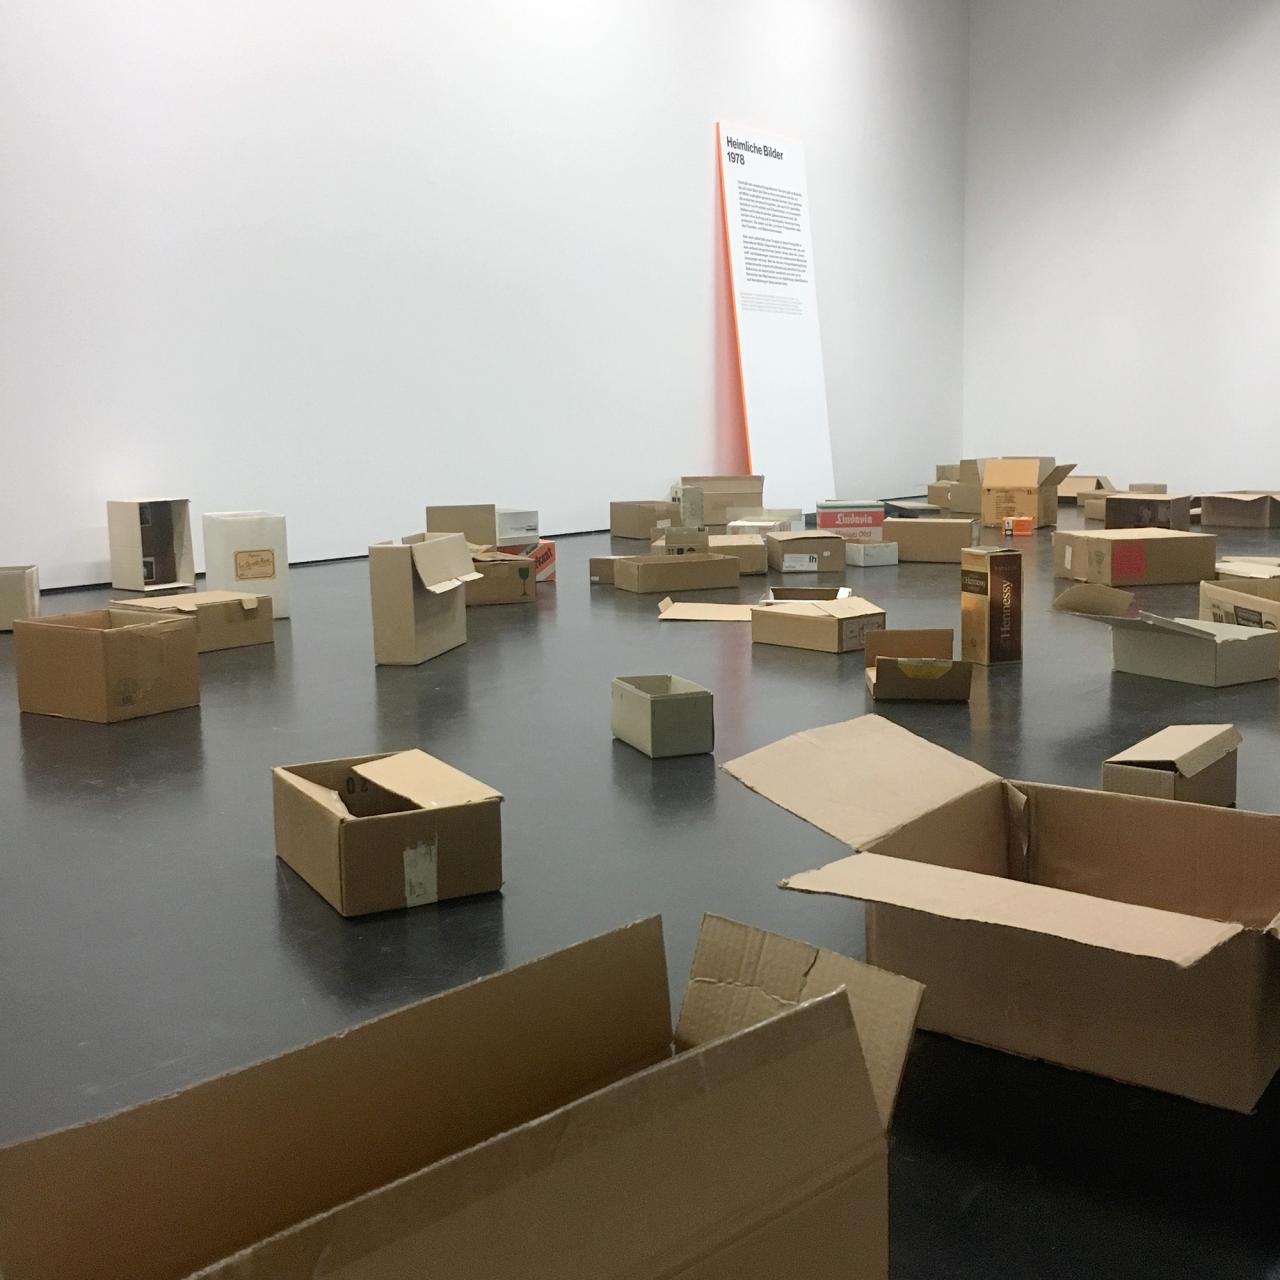 Brown cardboard boxes, distributed throughout the room